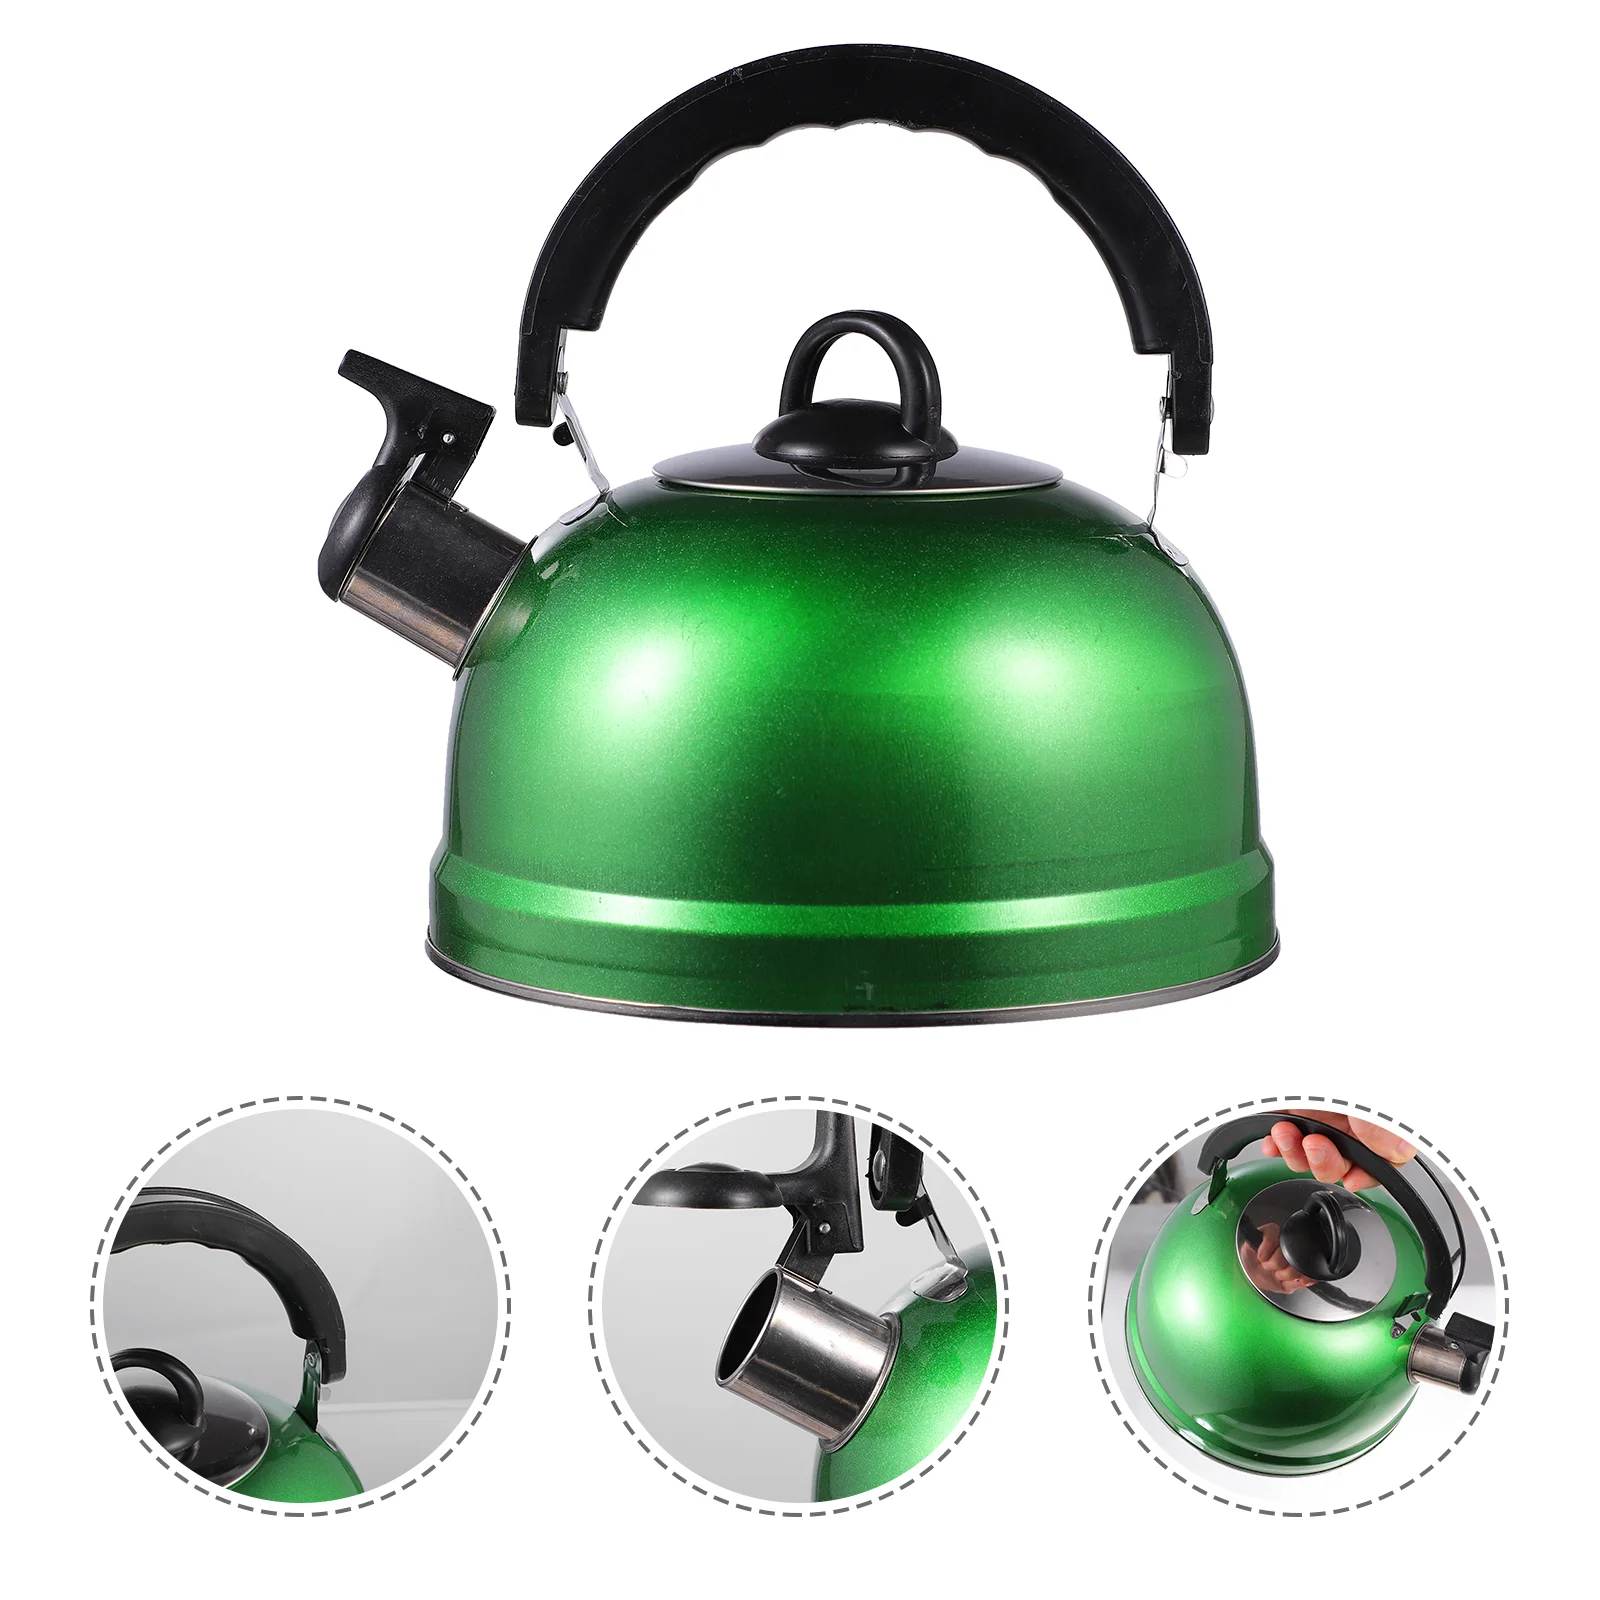 

Kettle Tea Whistling Stovetop Water Stainless Steel Teapot Stove Pot Kettles Boiler Pitcher Gas Coffee Boiling Teakettle